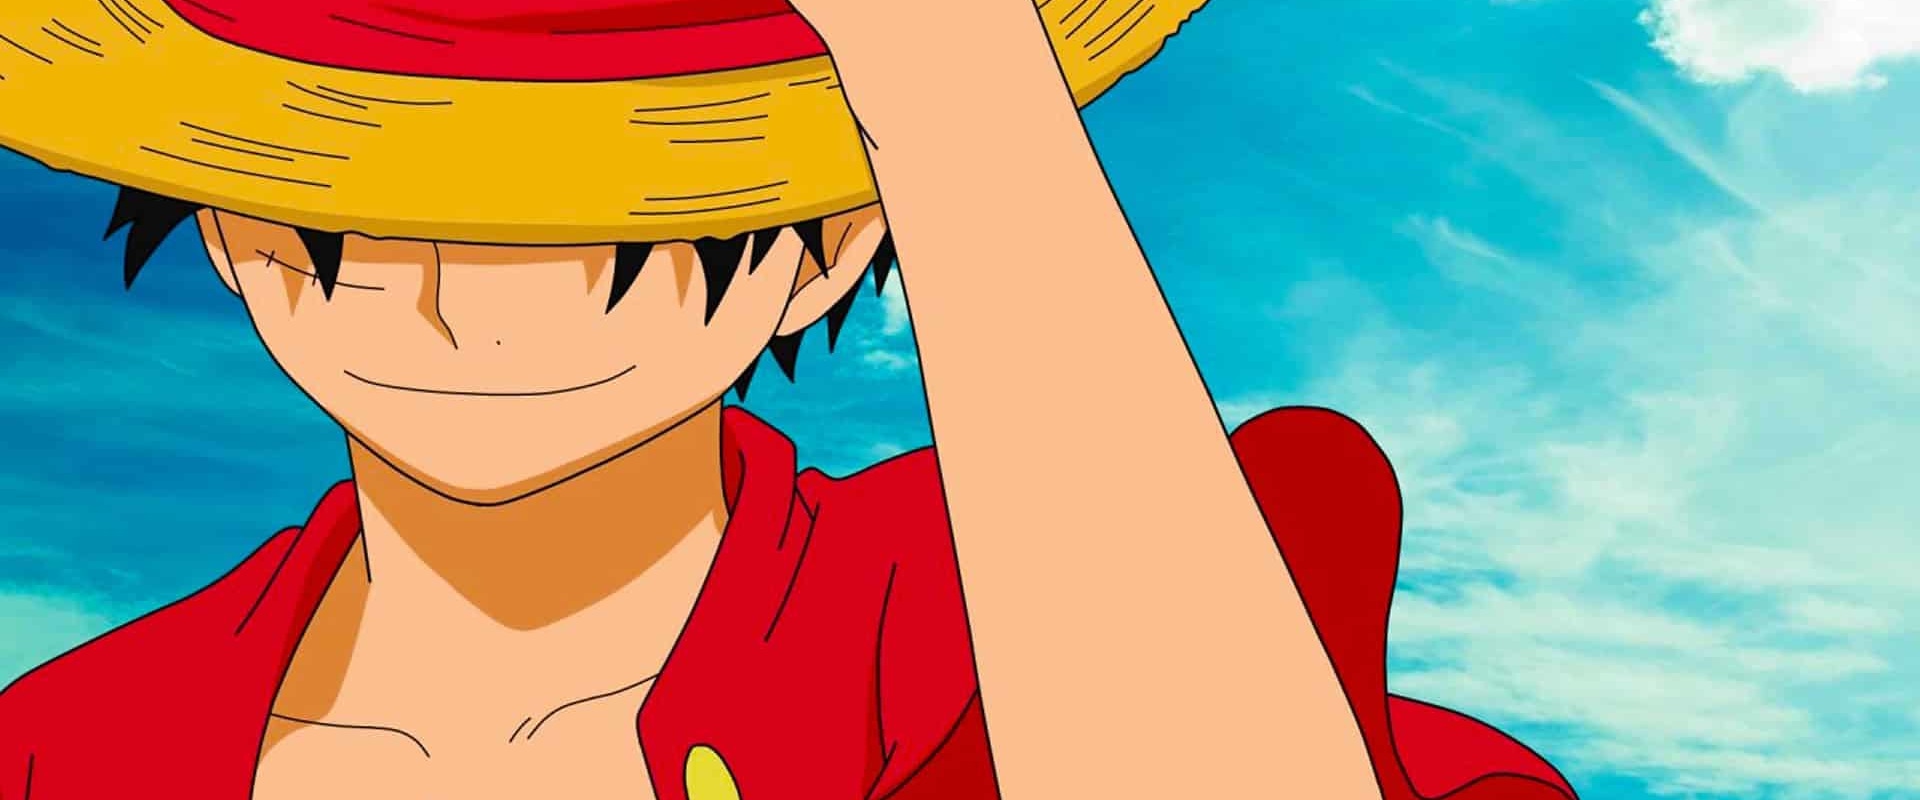 The Most Popular Manga Characters of All Time